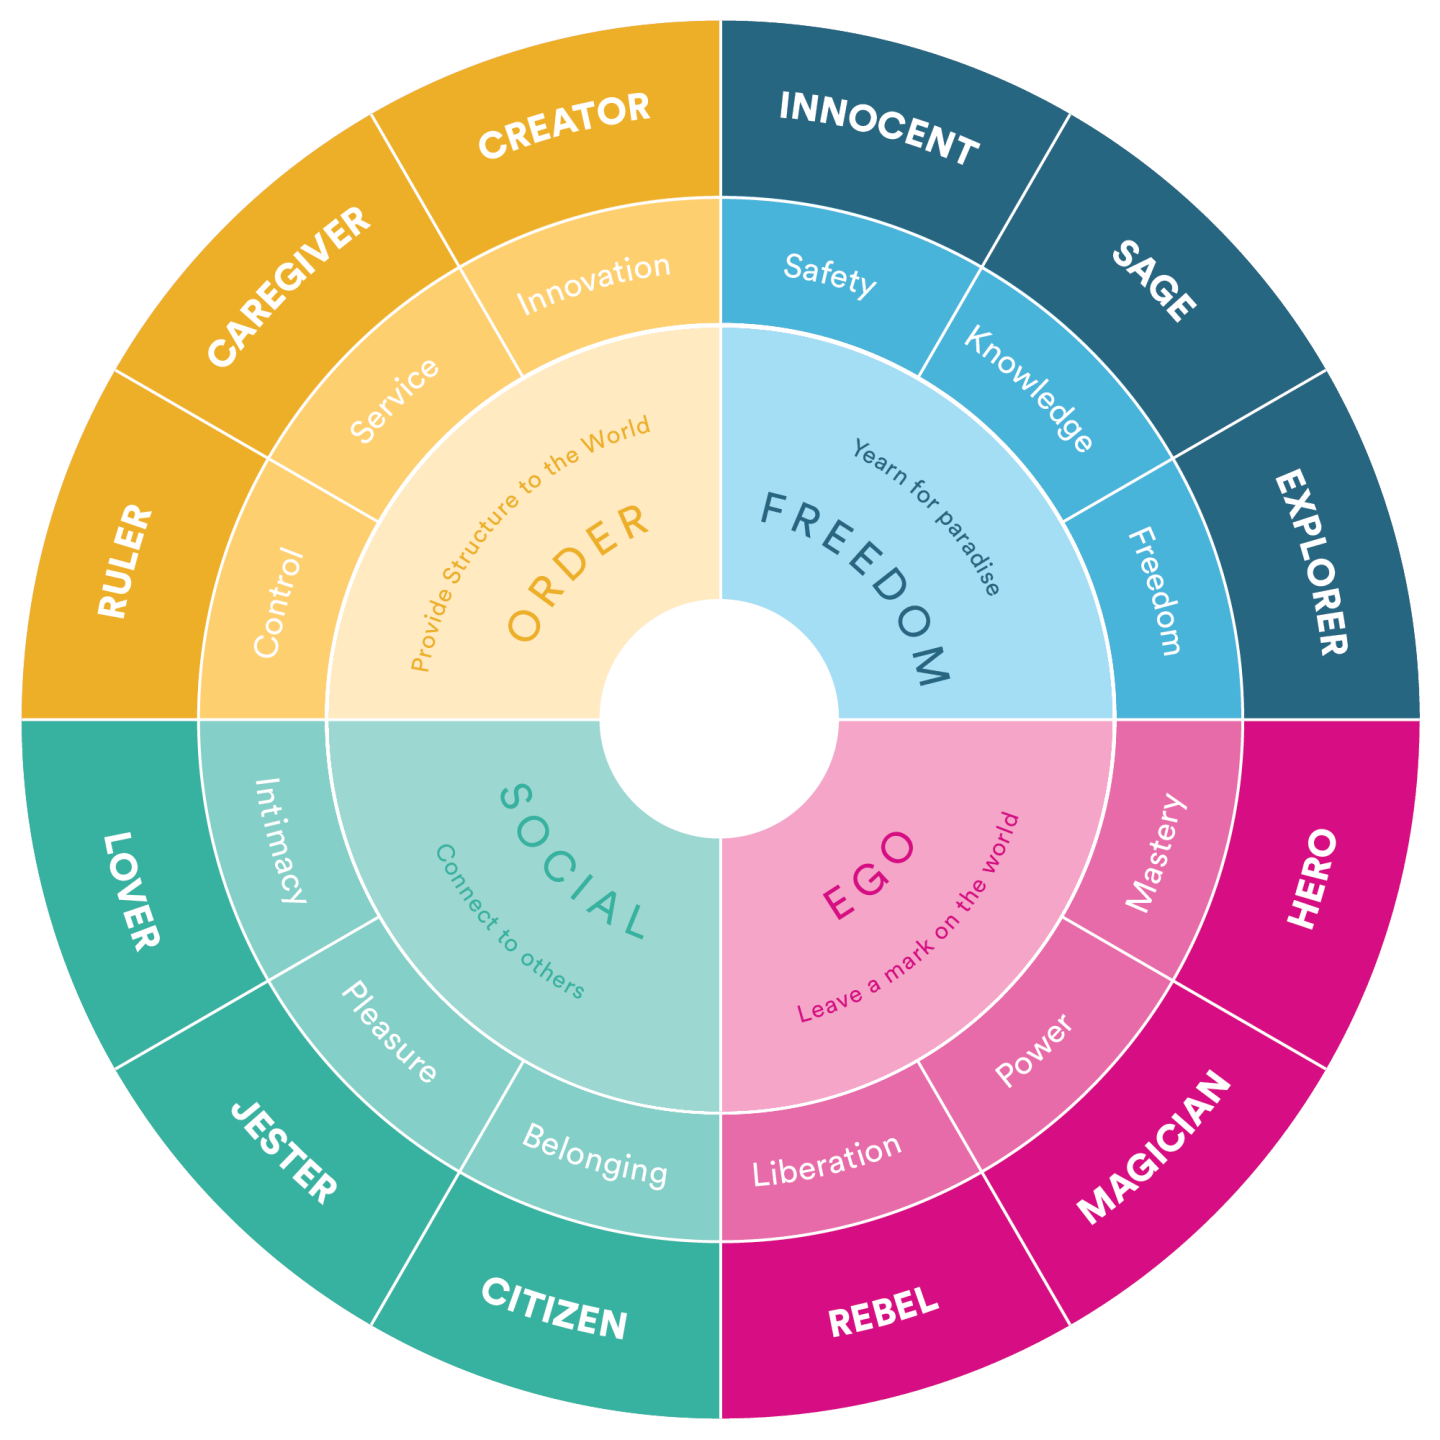 Carl Jung’s 12 brand archetypes 